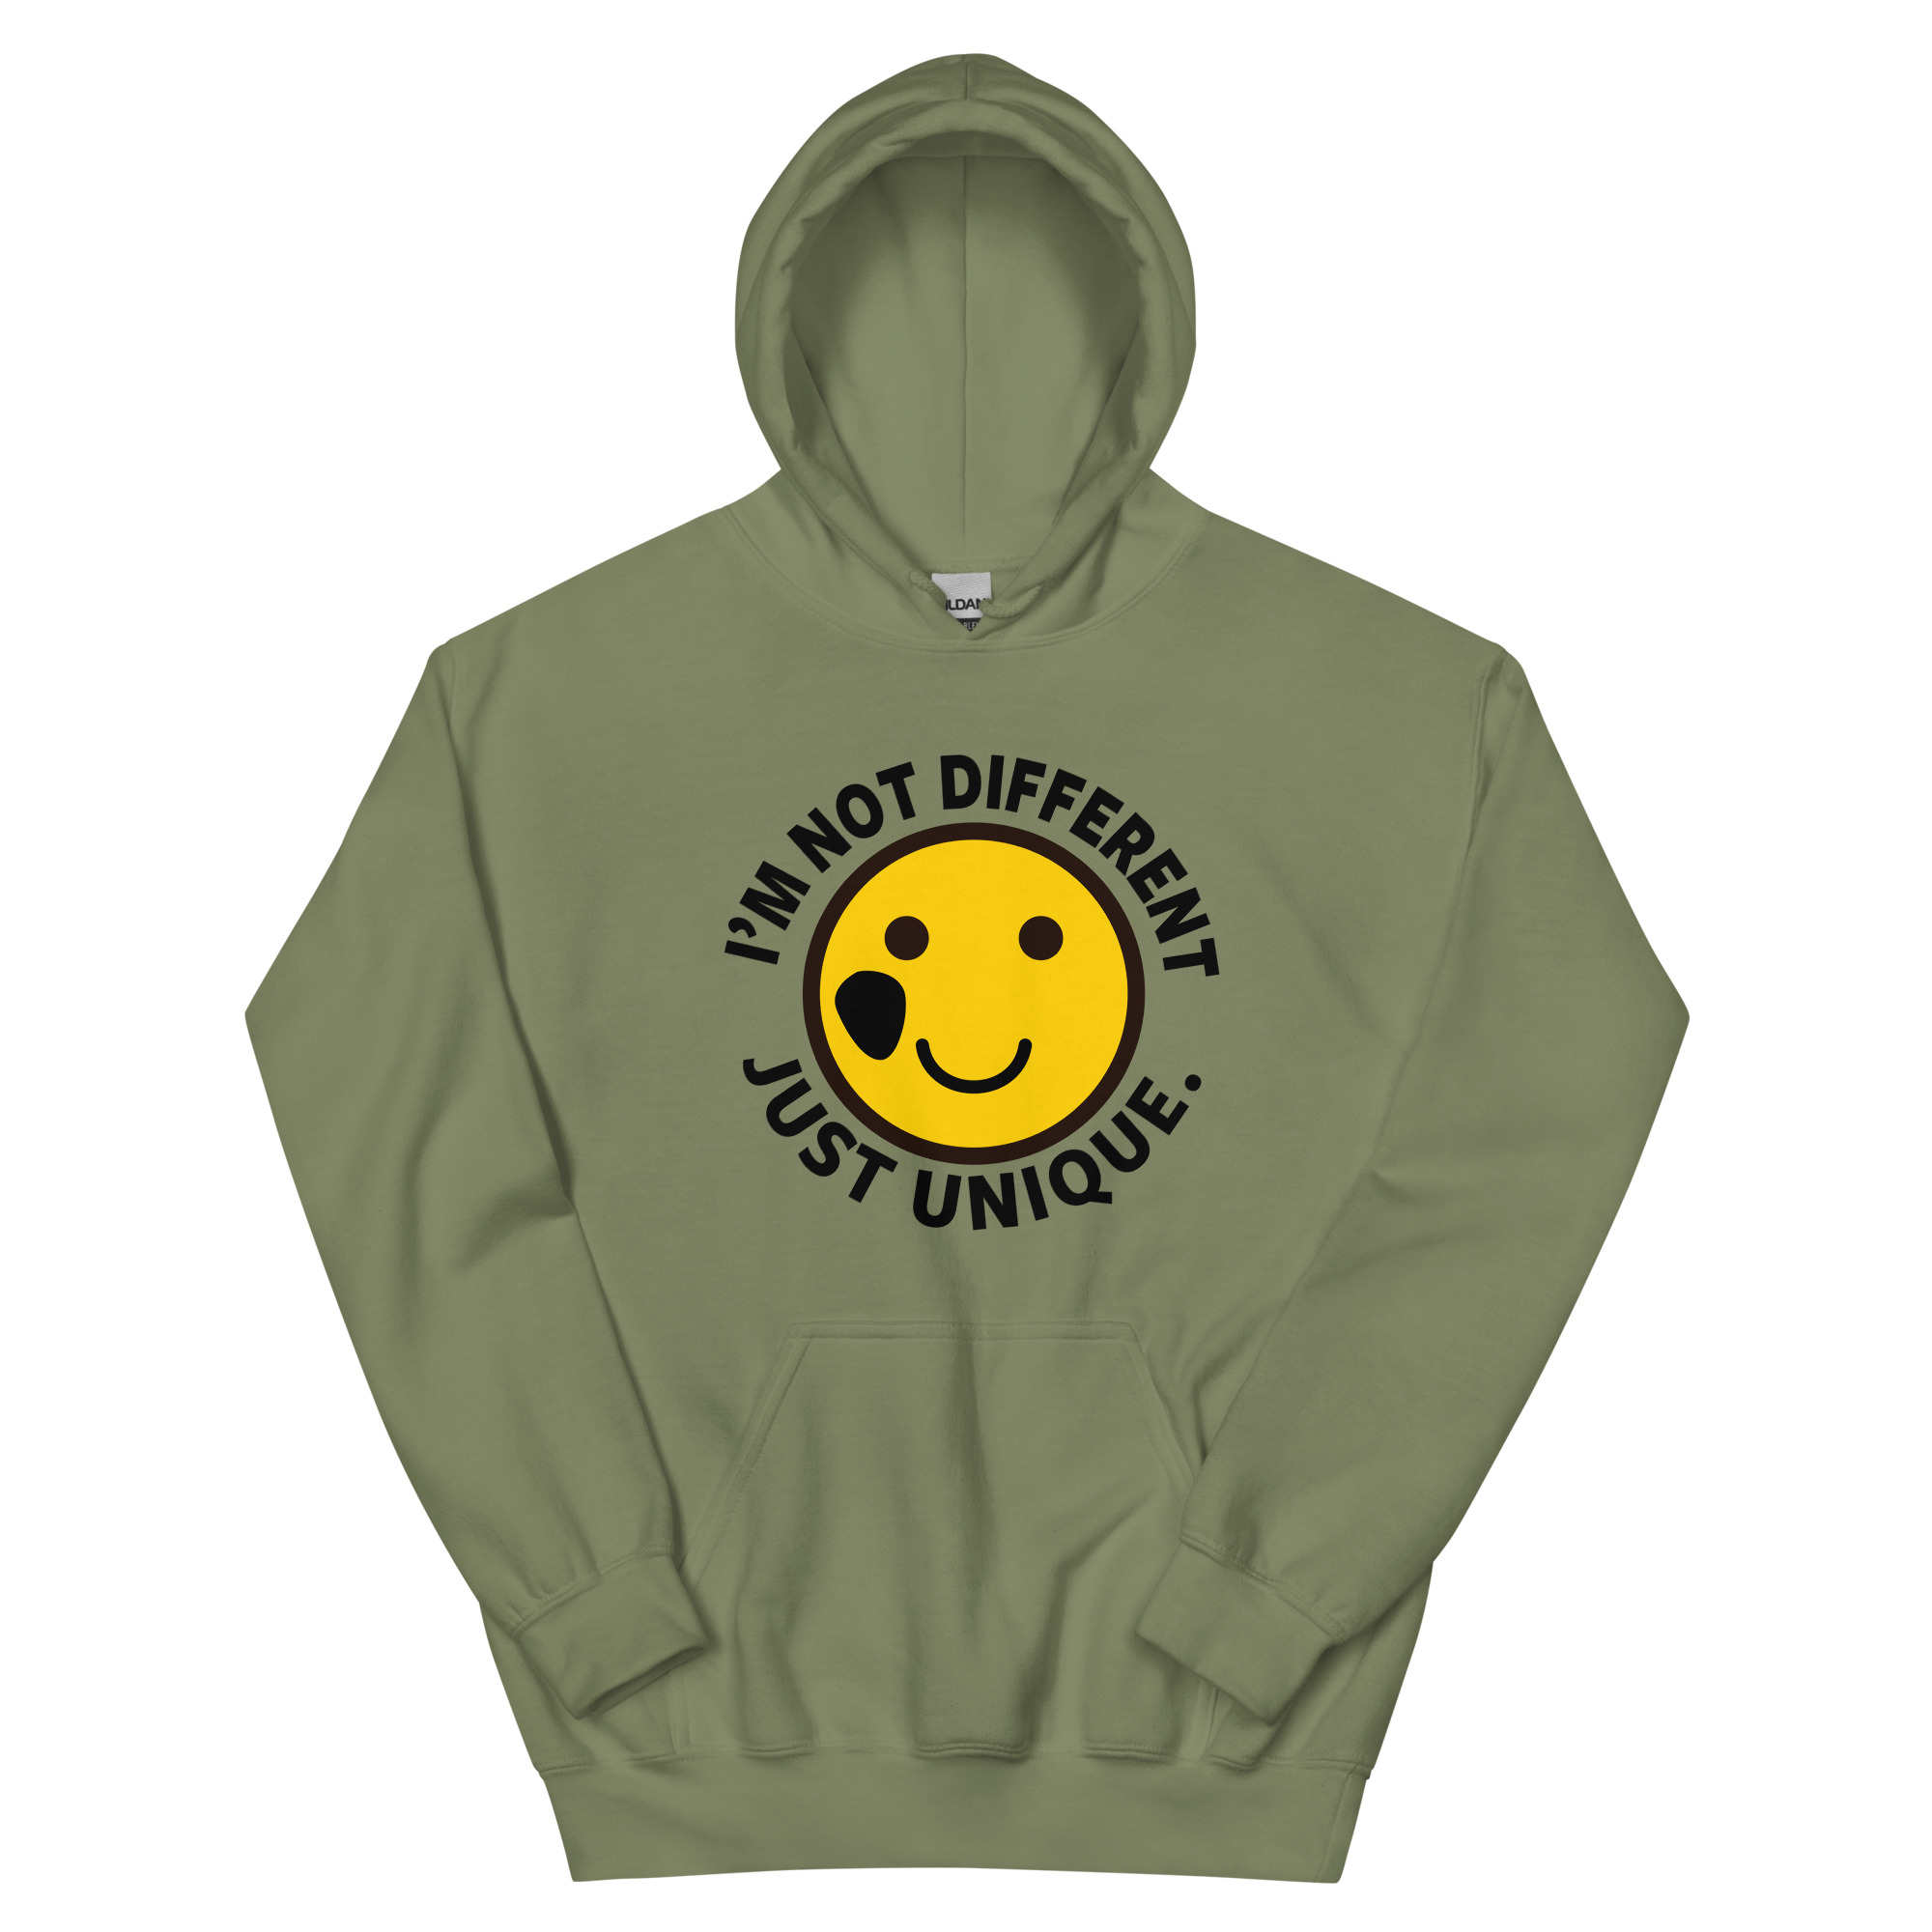 unisex-heavy-blend-hoodie-military-green-front-65393e05f36ad.jpg